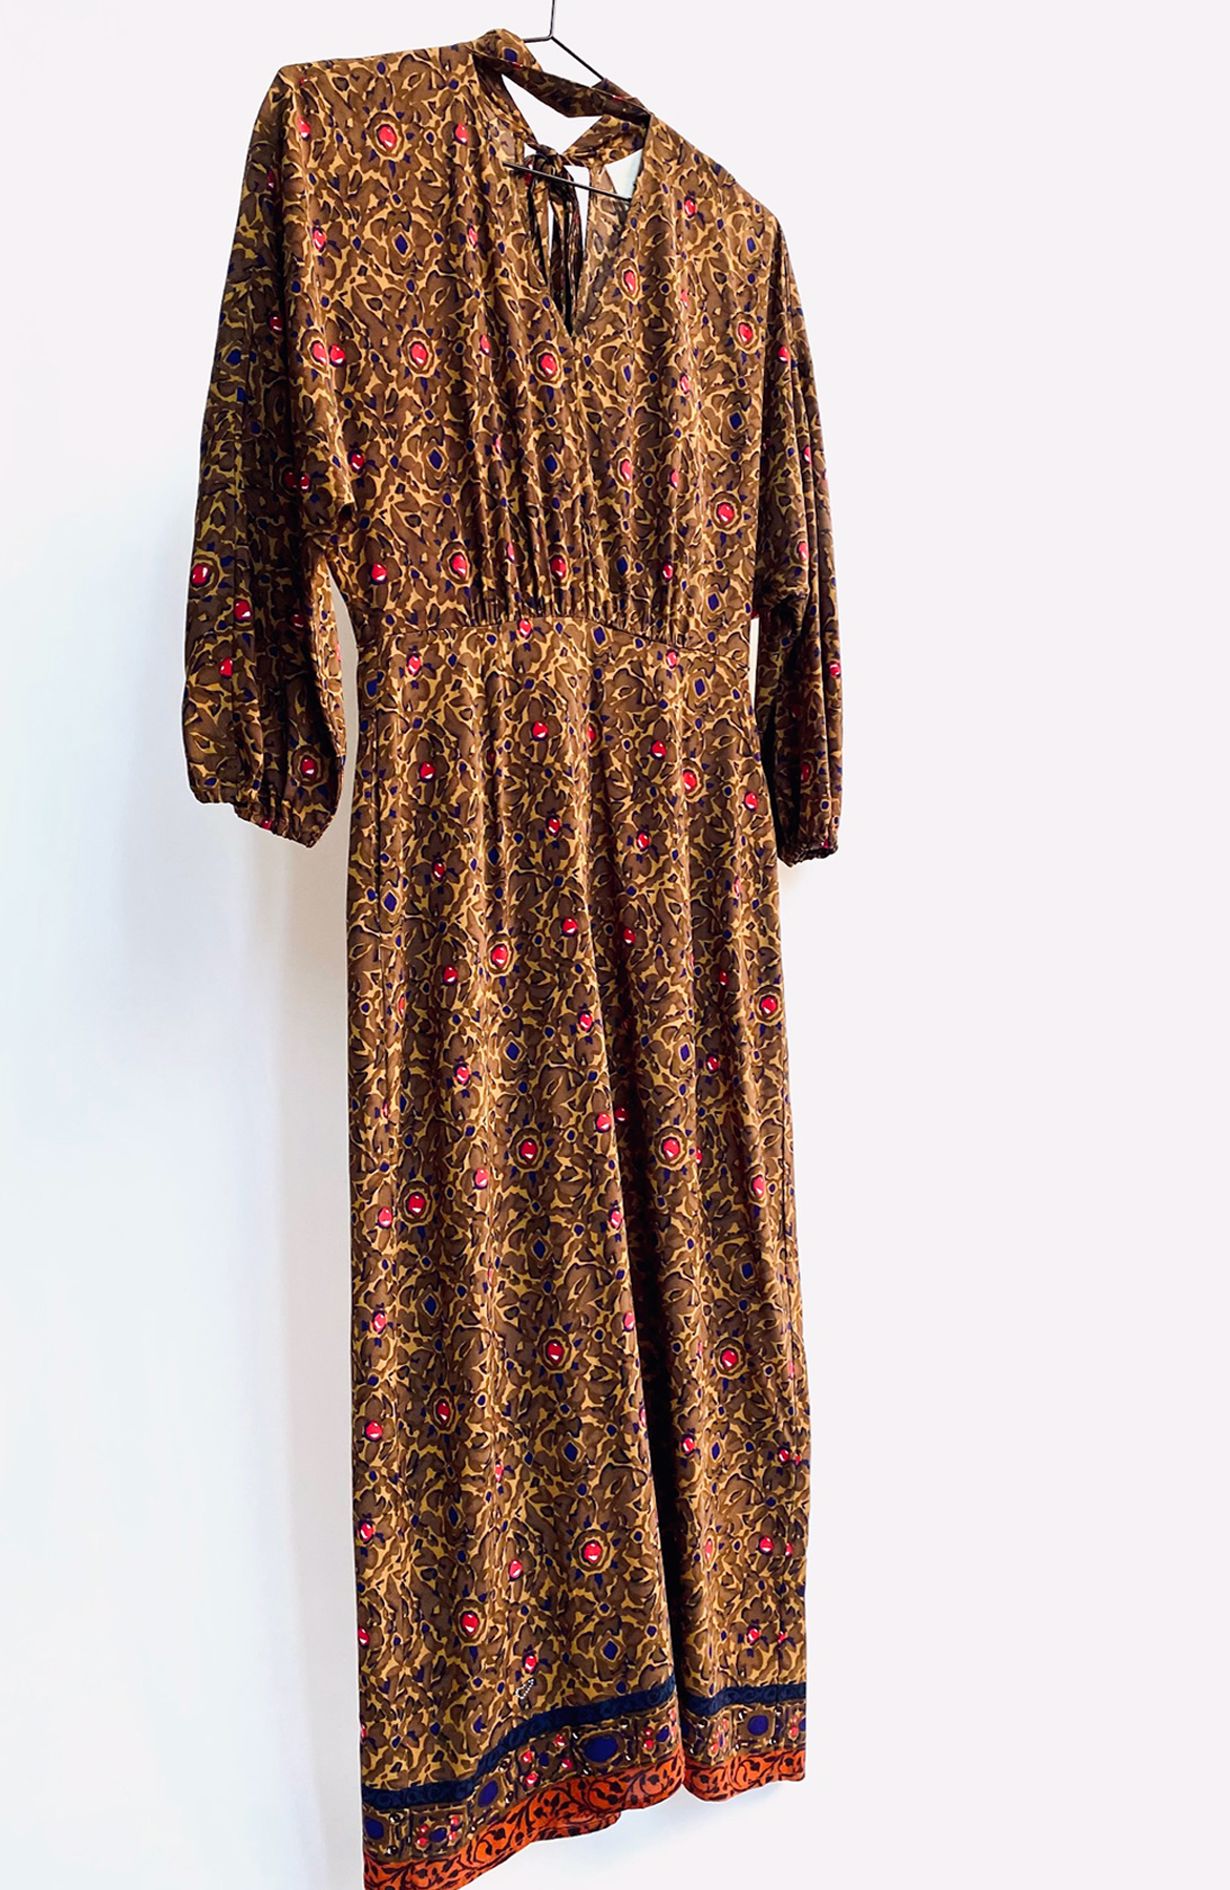 Heartmade Dress - Brown / Red Print Size 34